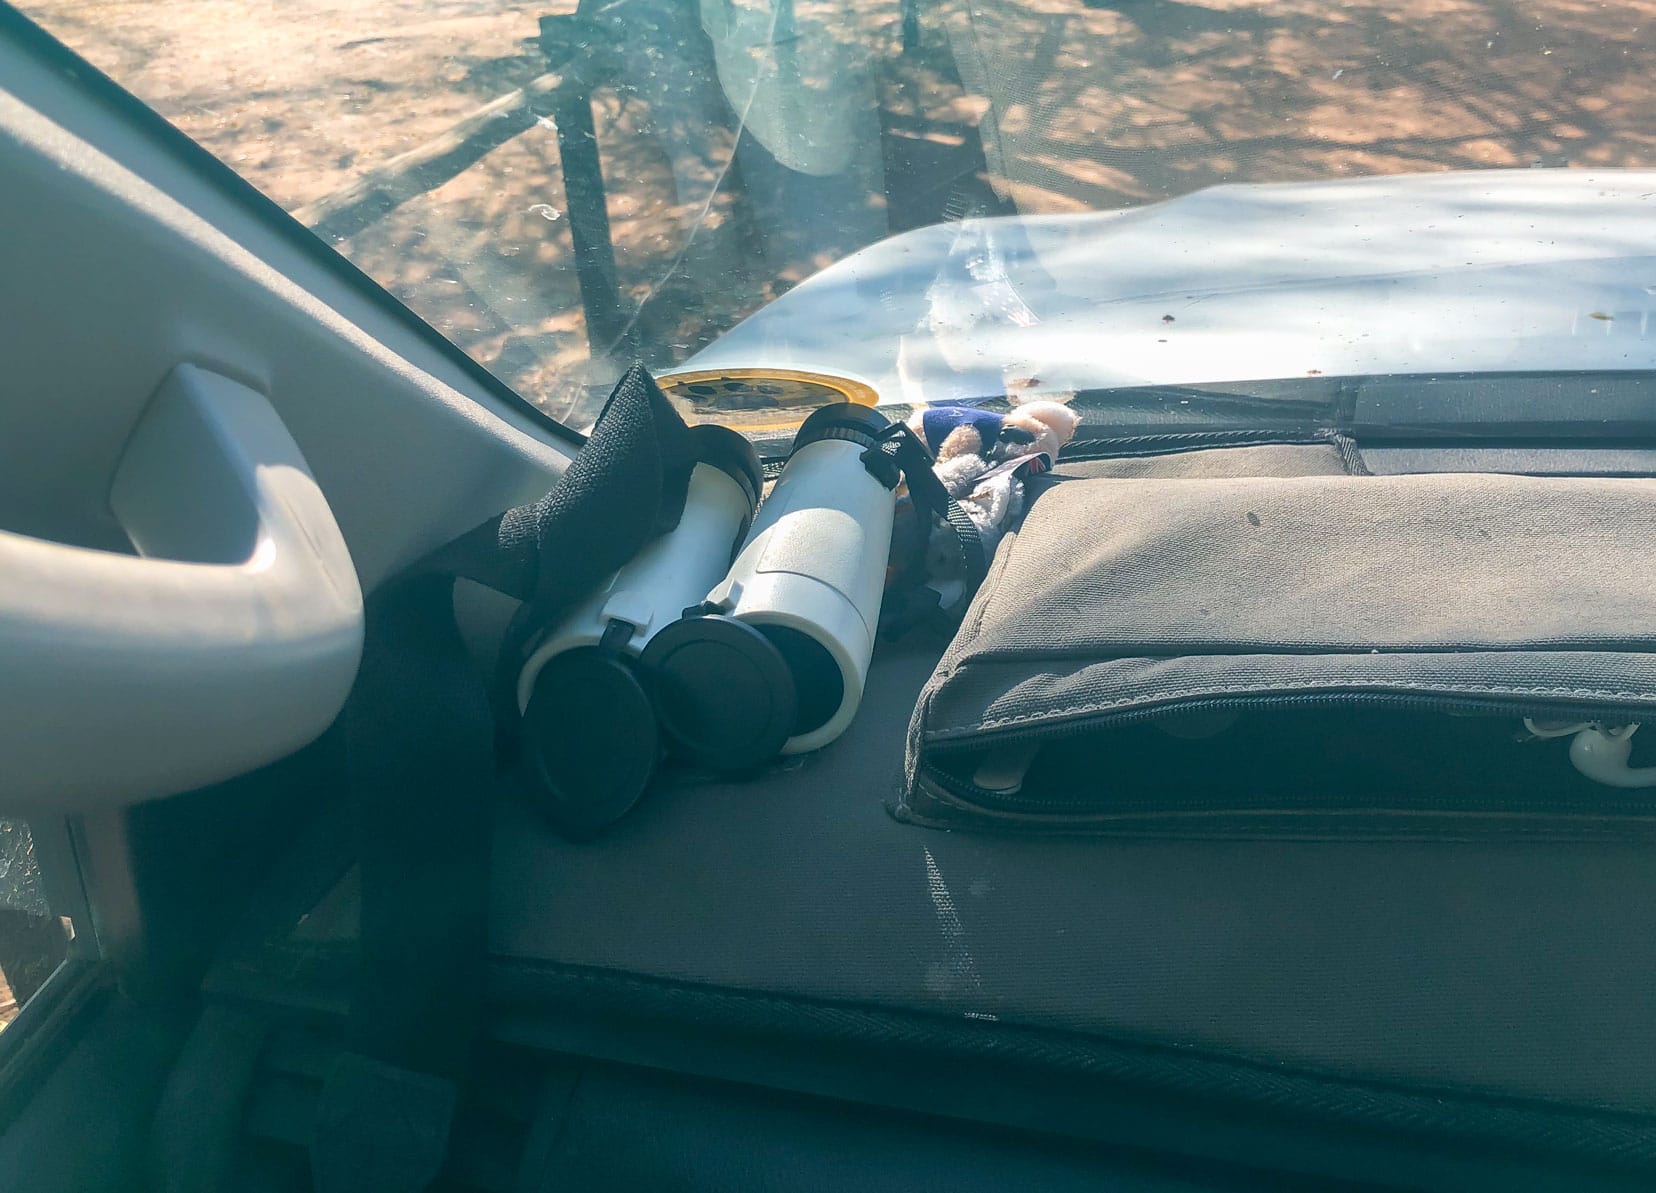 safari accessories - Avalon-binoculars-on-the-dash-of-our-Hilux